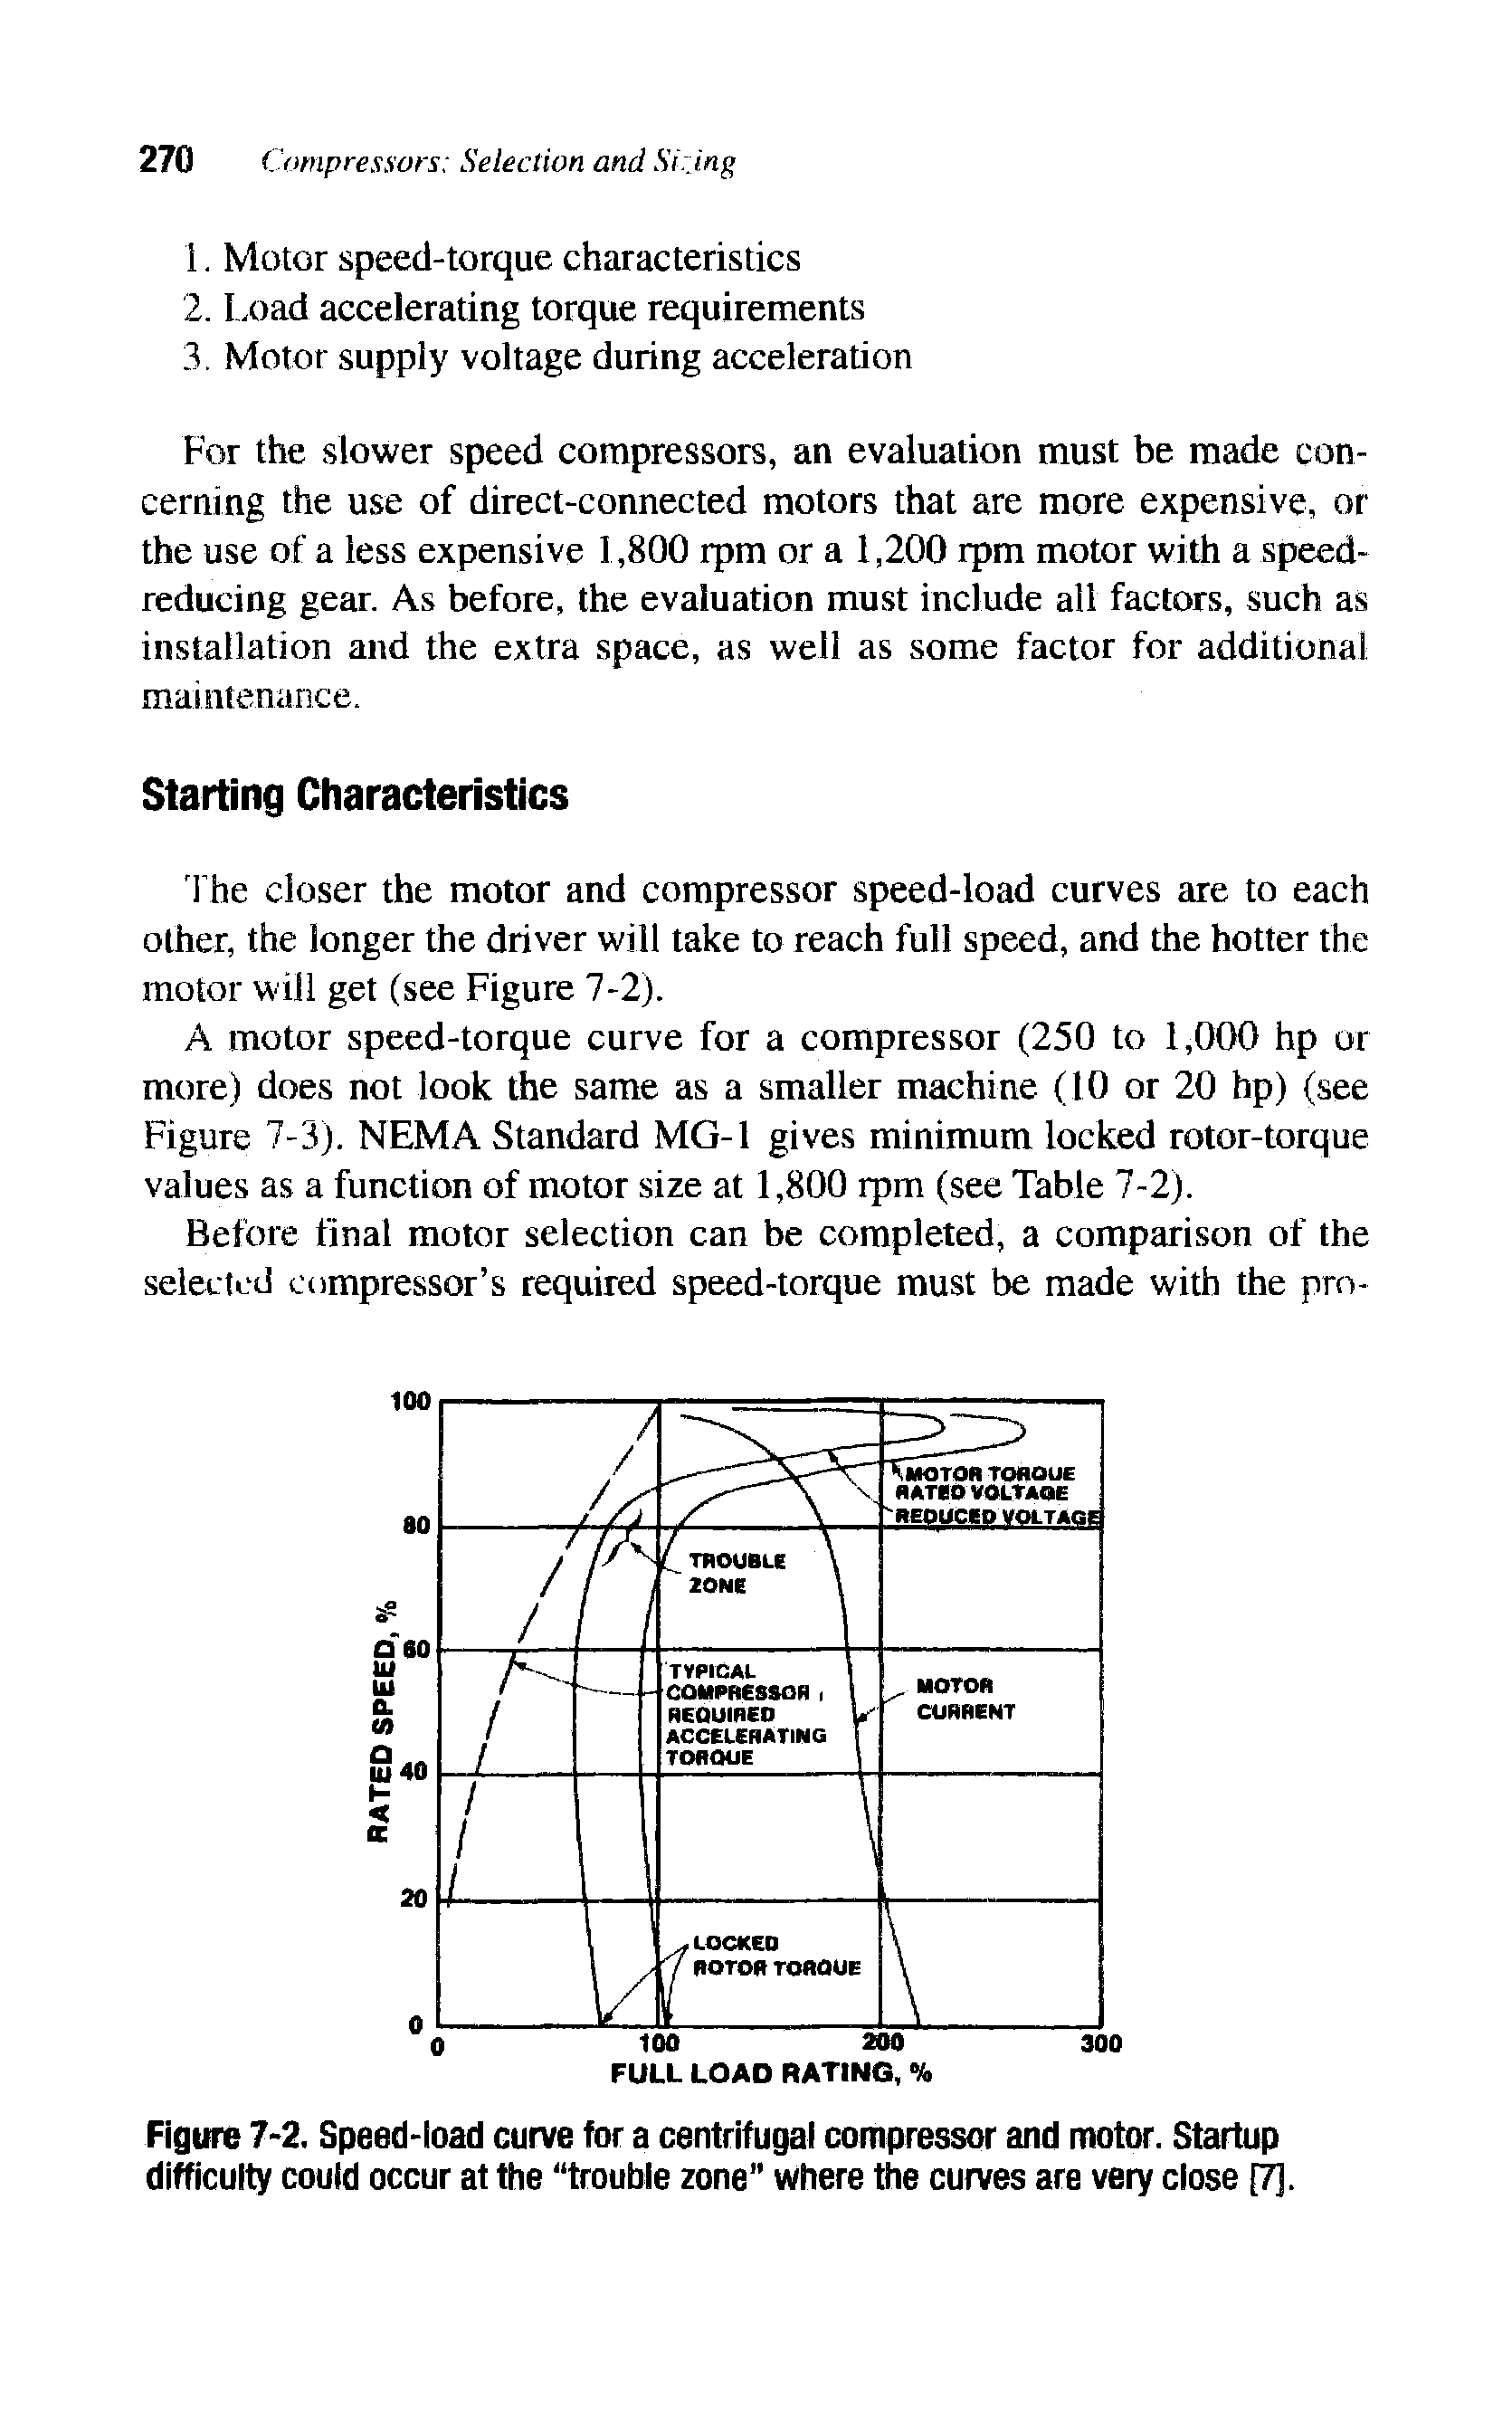 Figure 7-2. Speed-load curve for a centrifugal compressor and motor. Startup difficulty could occur at the trouble zone where the curves are very close [7].